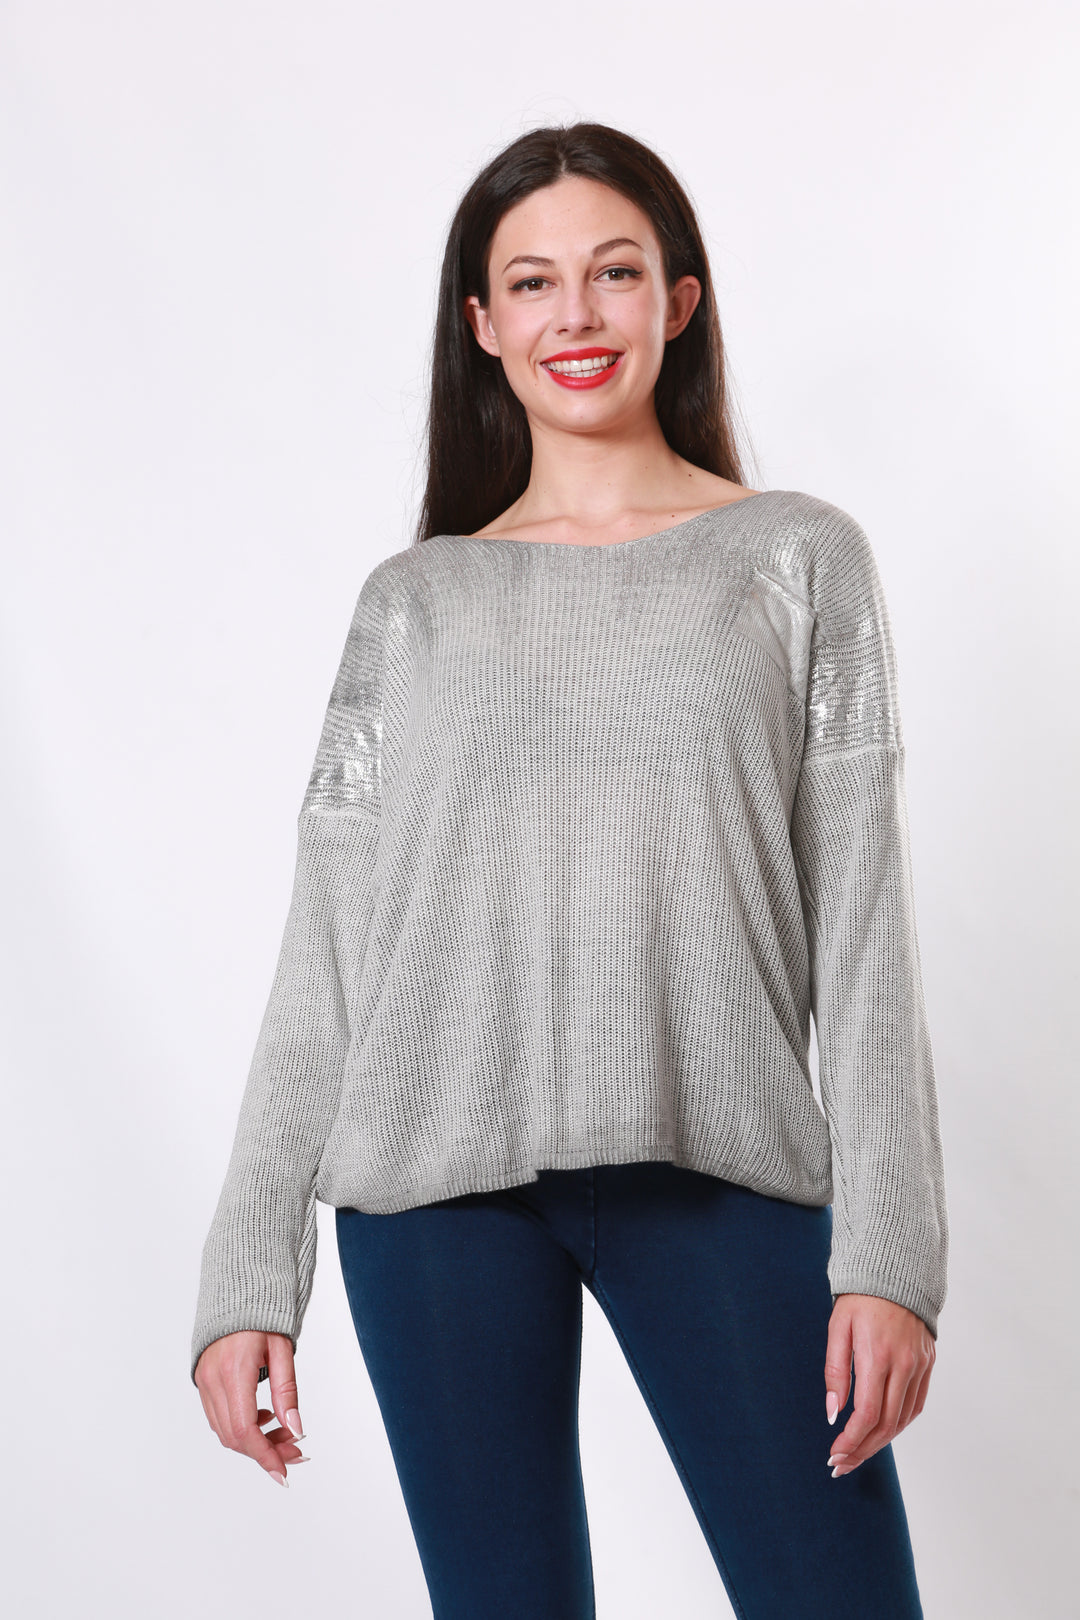 Made in Italy V neck knit with silver embellishment - Greyaos-init aos-animate